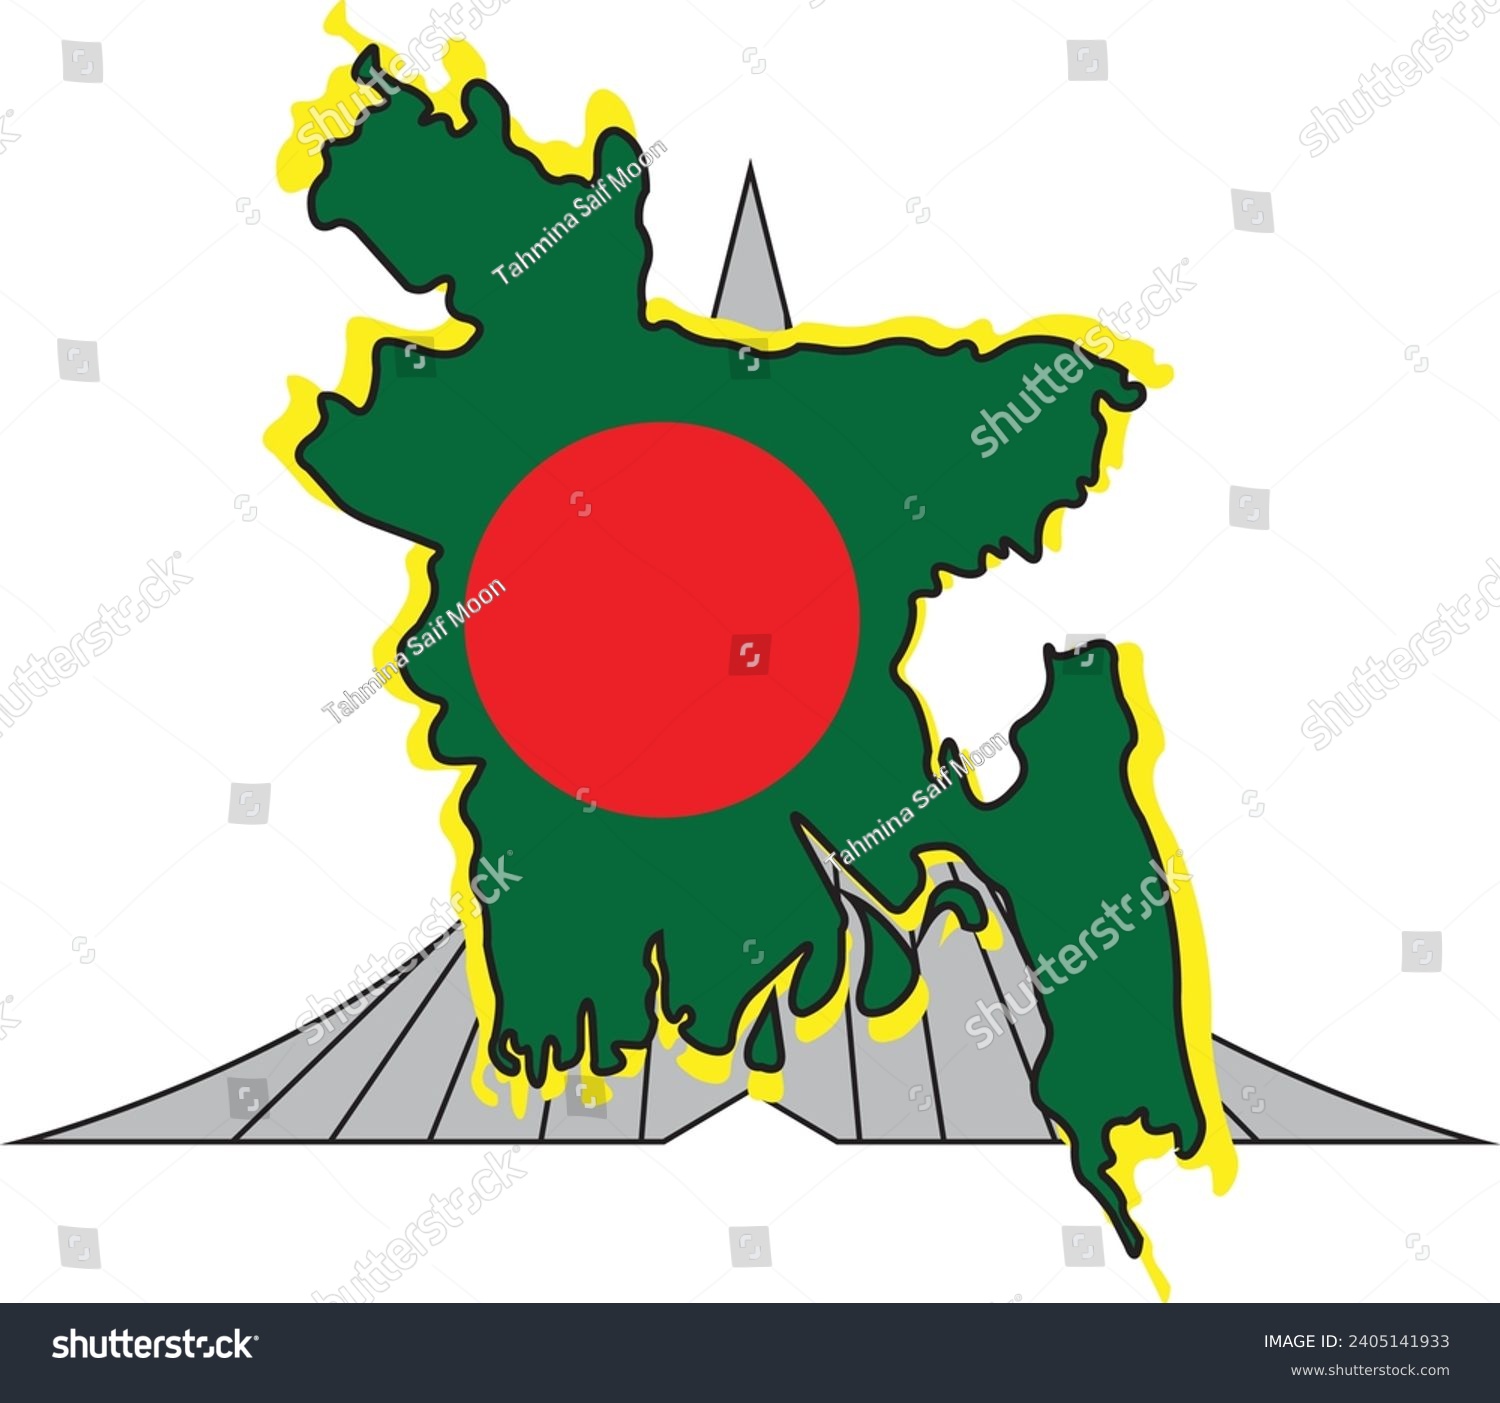 SVG of This is an illustration of Bangladesh map. svg